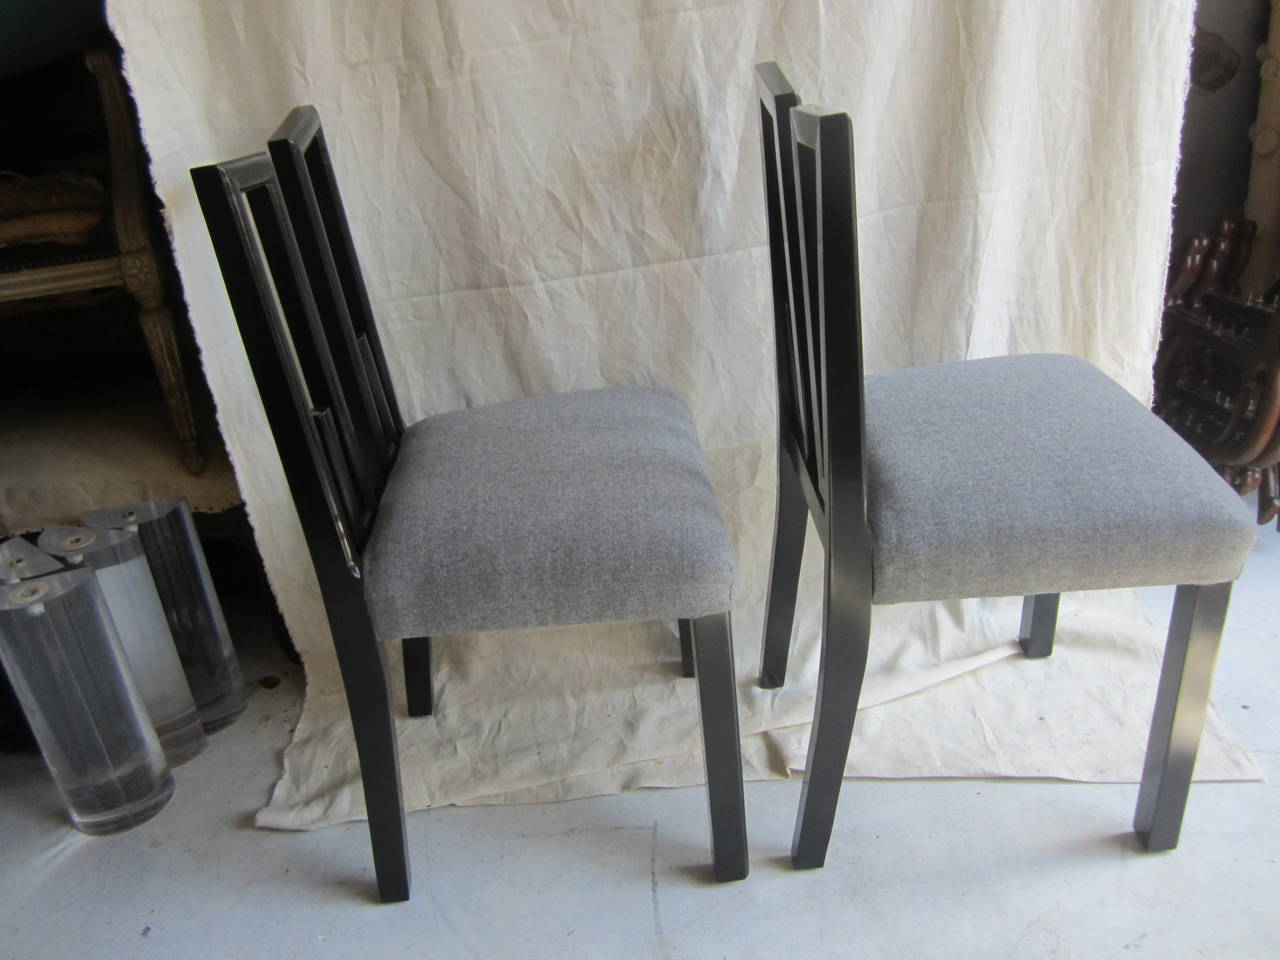 Newly lacquered in black and upholstered in grey cashmere/wool.